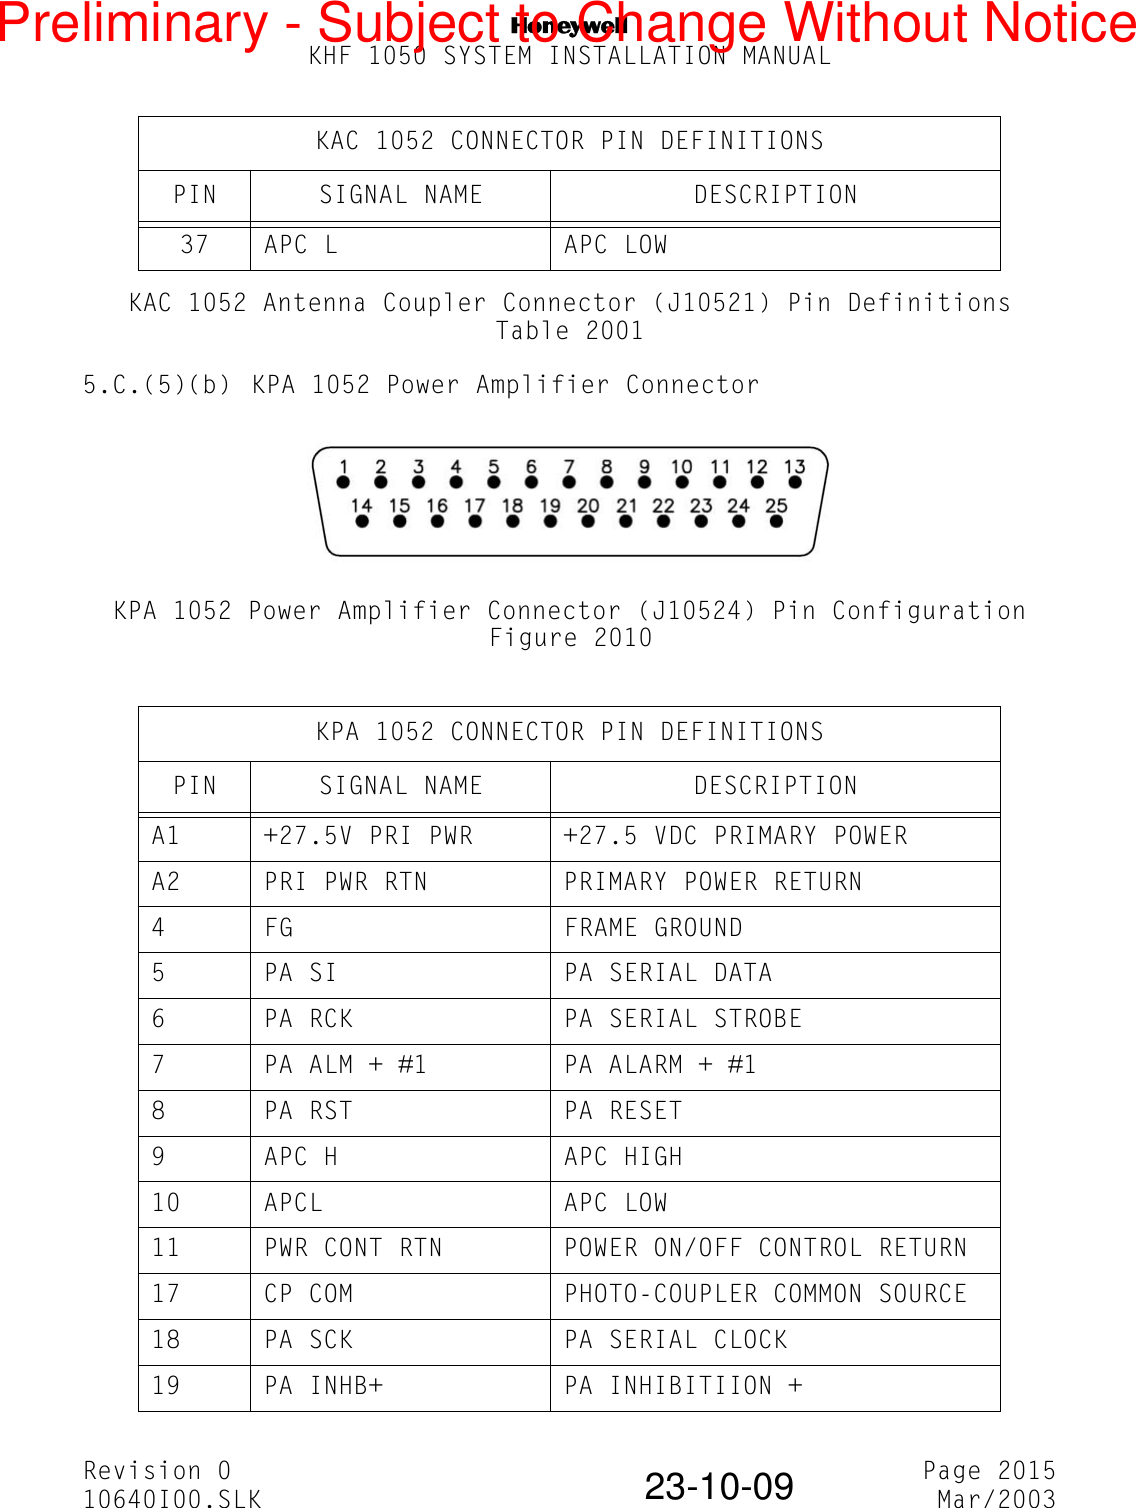 NKHF 1050 SYSTEM INSTALLATION MANUALRevision 0 Page 201510640I00.SLK Mar/200323-10-09KAC 1052 Antenna Coupler Connector (J10521) Pin DefinitionsTable 20015.C.(5)(b) KPA 1052 Power Amplifier ConnectorKPA 1052 Power Amplifier Connector (J10524) Pin ConfigurationFigure 201037 APC L APC LOWKPA 1052 CONNECTOR PIN DEFINITIONSPIN SIGNAL NAME DESCRIPTIONA1 +27.5V PRI PWR +27.5 VDC PRIMARY POWERA2 PRI PWR RTN PRIMARY POWER RETURN4 FG FRAME GROUND5 PA SI PA SERIAL DATA6 PA RCK PA SERIAL STROBE7 PA ALM + #1 PA ALARM + #18 PA RST PA RESET9 APC H APC HIGH10 APCL APC LOW11 PWR CONT RTN POWER ON/OFF CONTROL RETURN17 CP COM PHOTO-COUPLER COMMON SOURCE18 PA SCK PA SERIAL CLOCK19 PA INHB+ PA INHIBITIION +KAC 1052 CONNECTOR PIN DEFINITIONSPIN SIGNAL NAME DESCRIPTIONPreliminary - Subject to Change Without Notice